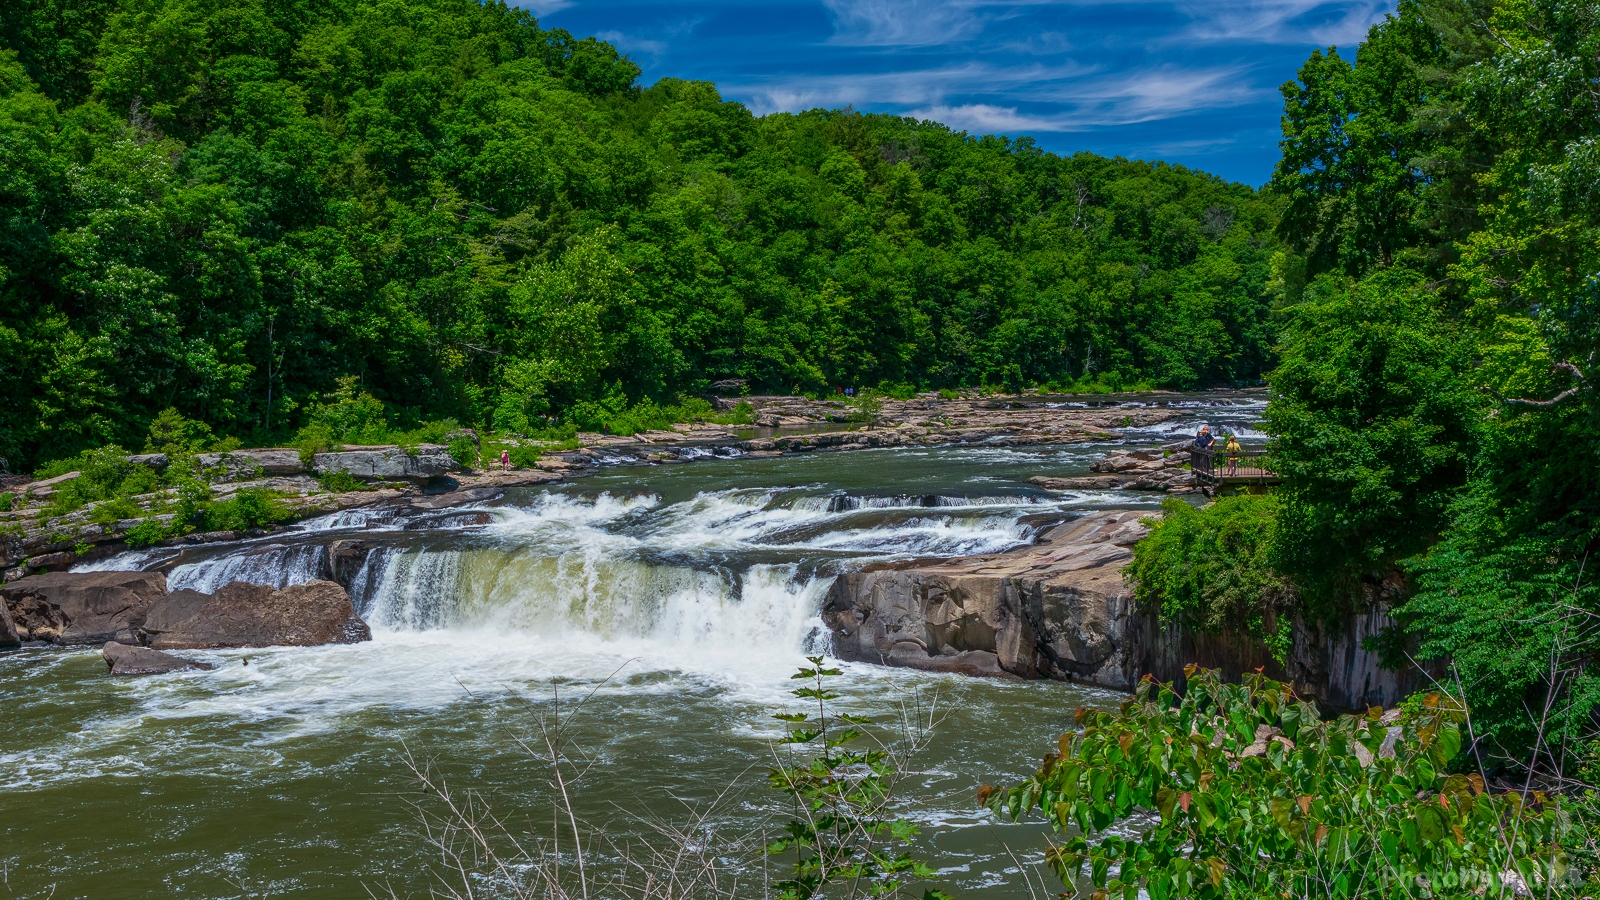 Image of Ohiopyle Falls, Youghiogheny River by Wayne Foote